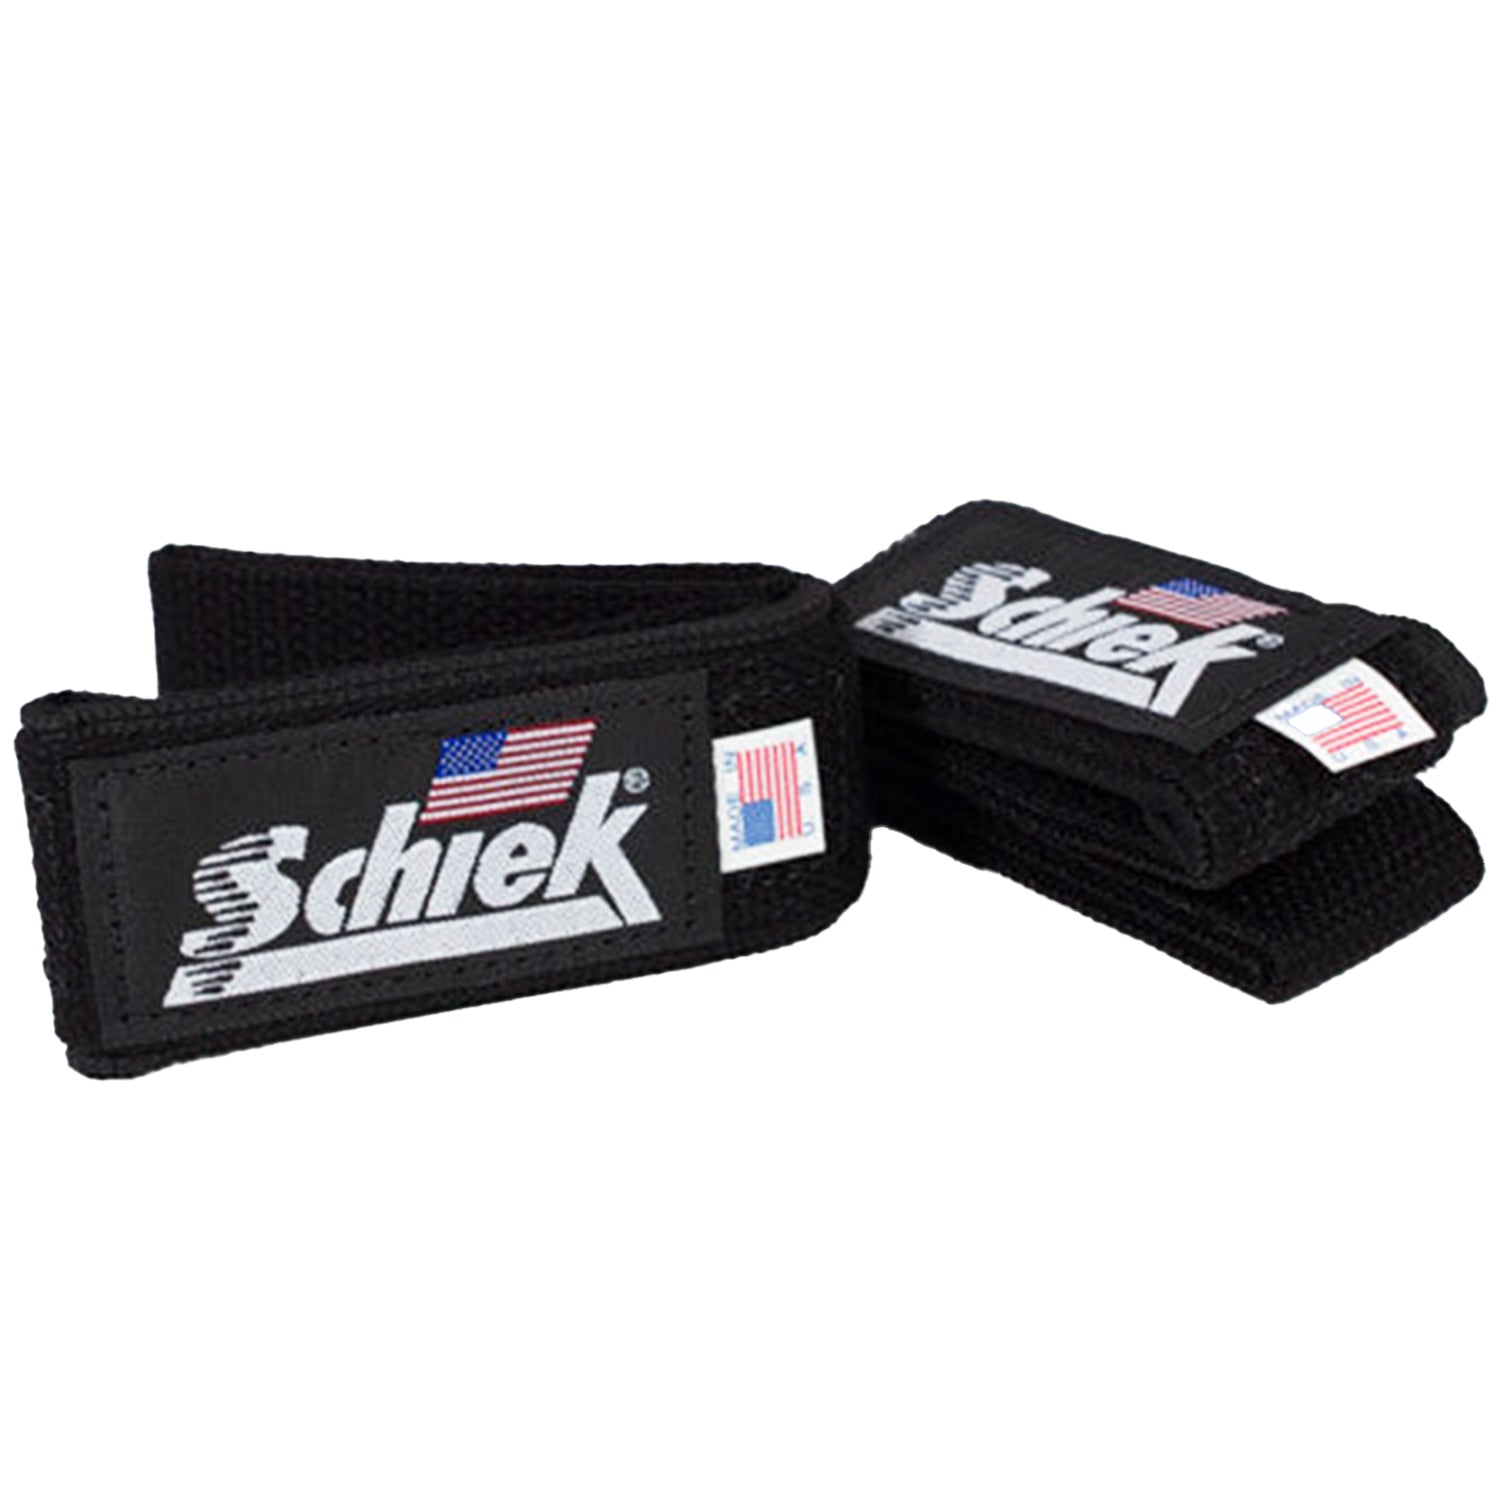 Weightlifting Straps and Wrist Wraps: high quality weightlifting  accessories made in USA